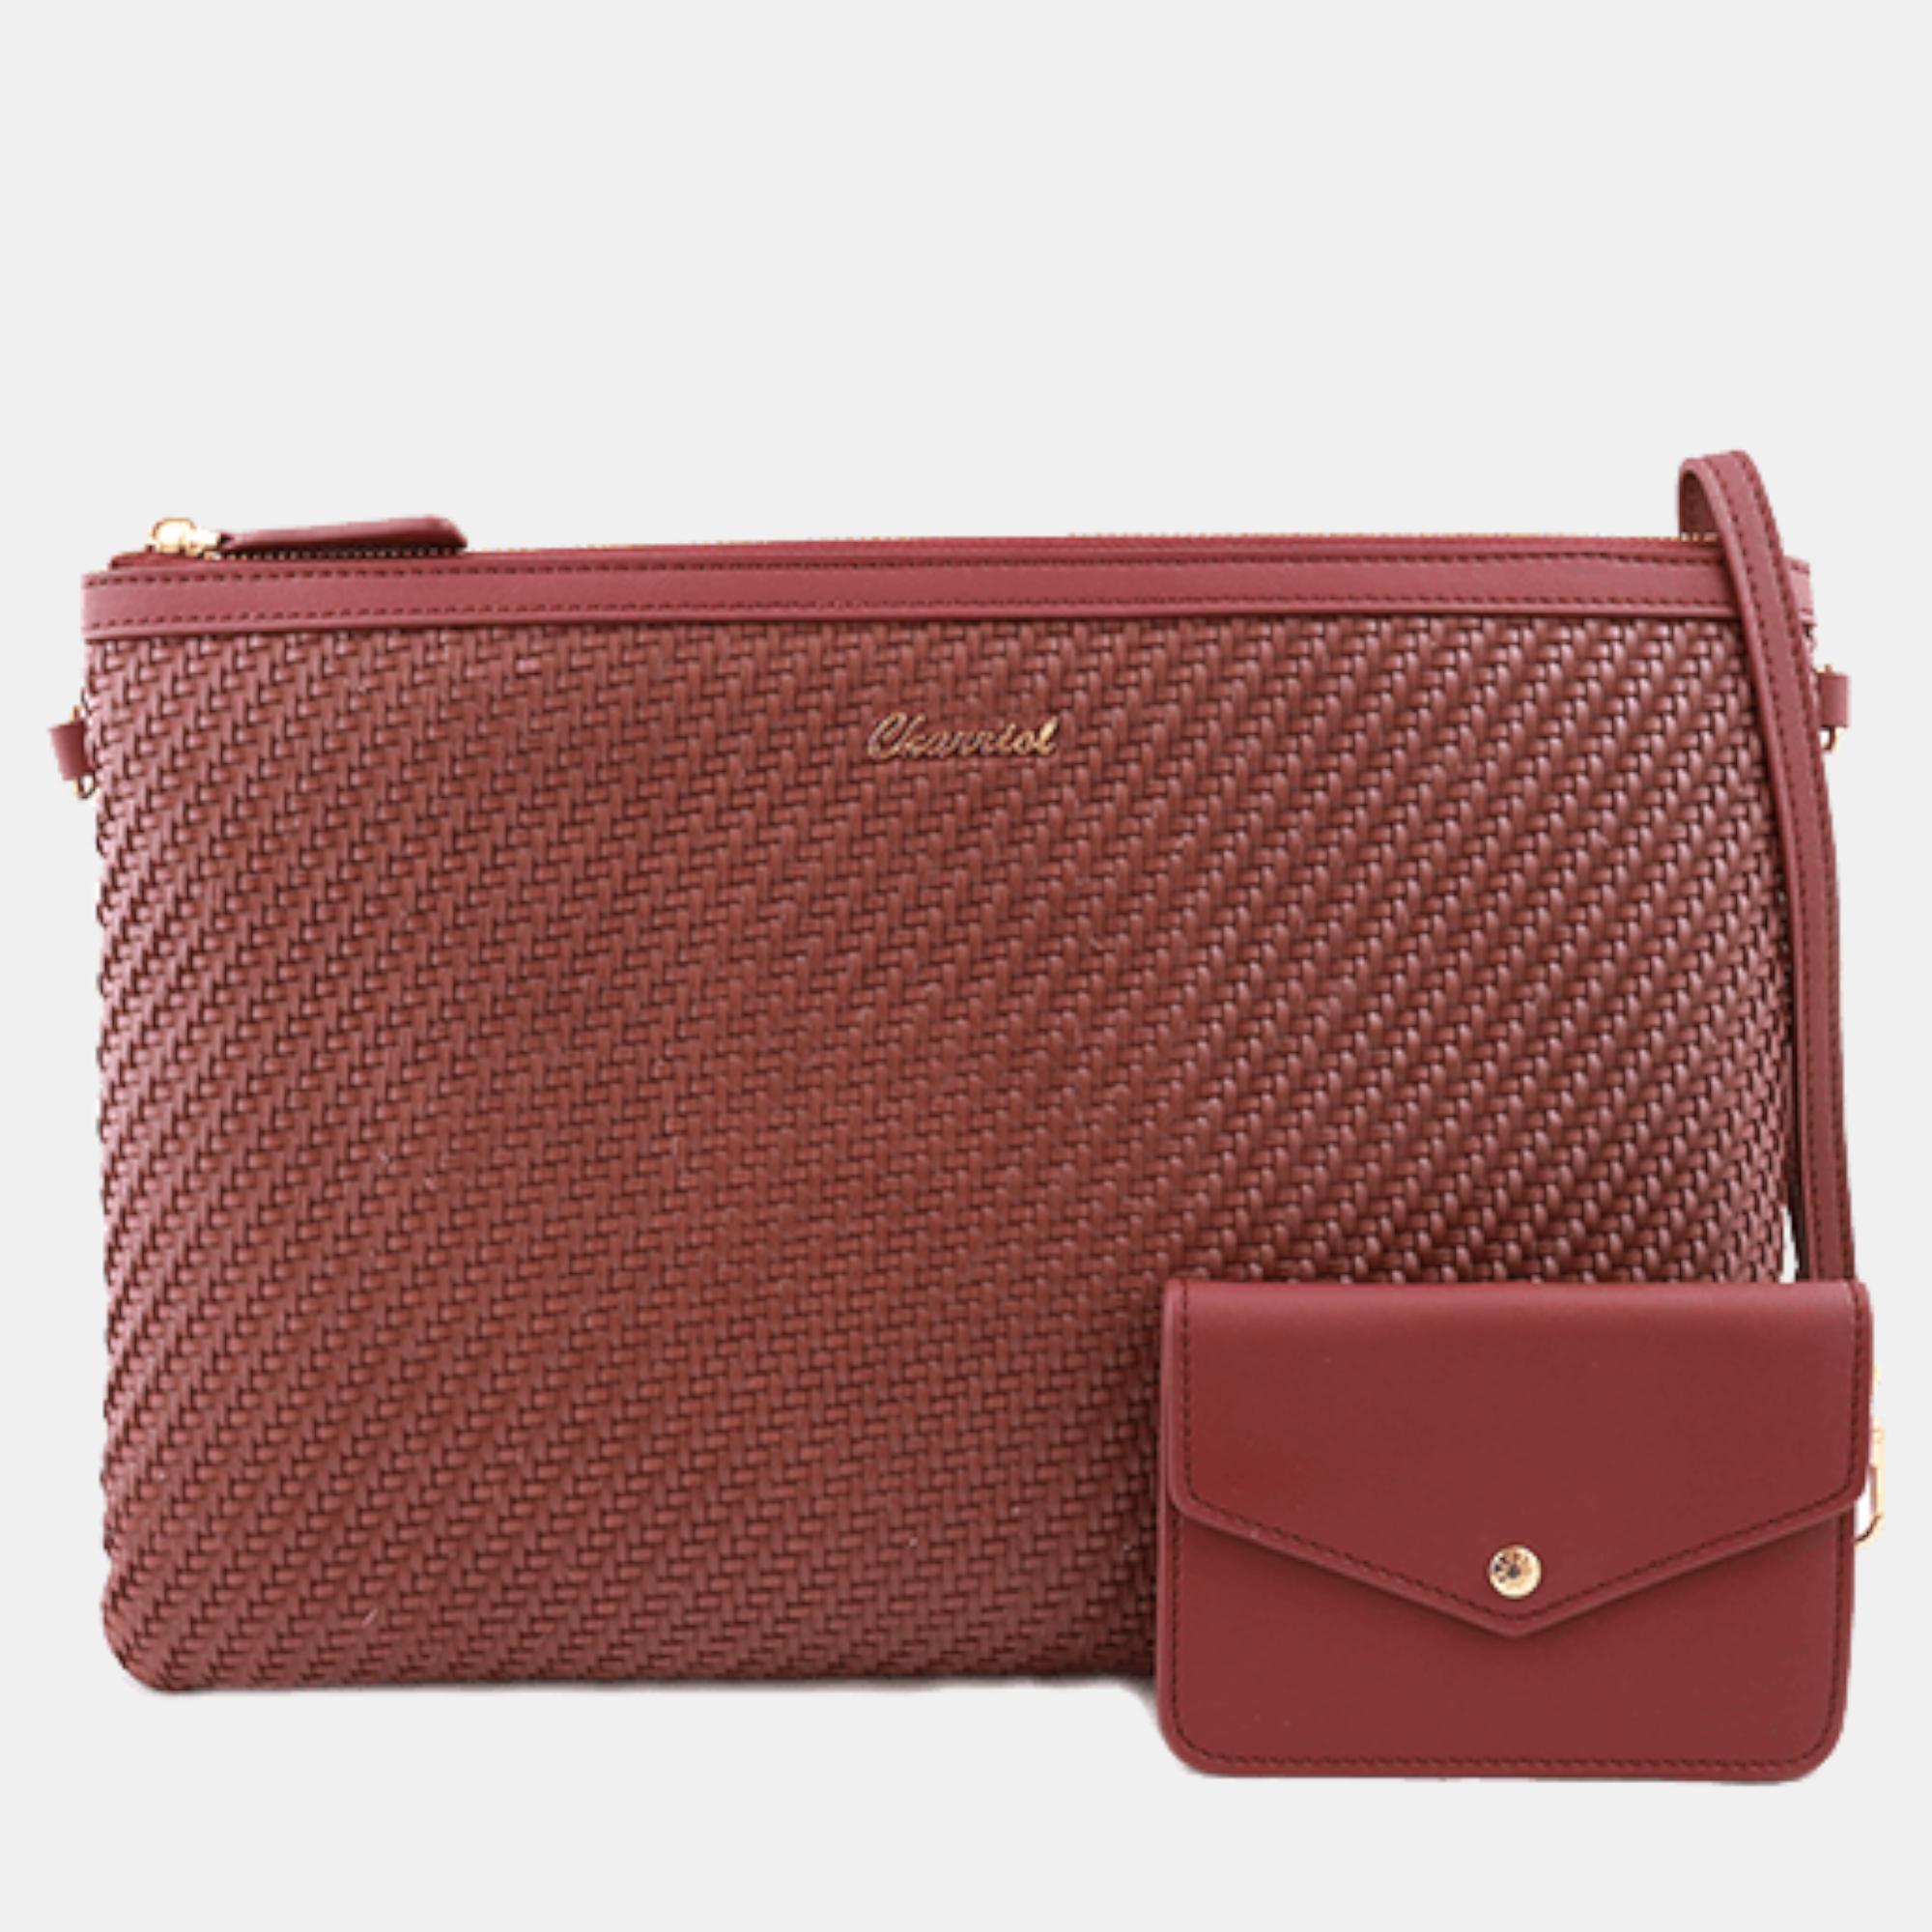 Pre-owned Charriol Burgundy Leather Christina Pouches